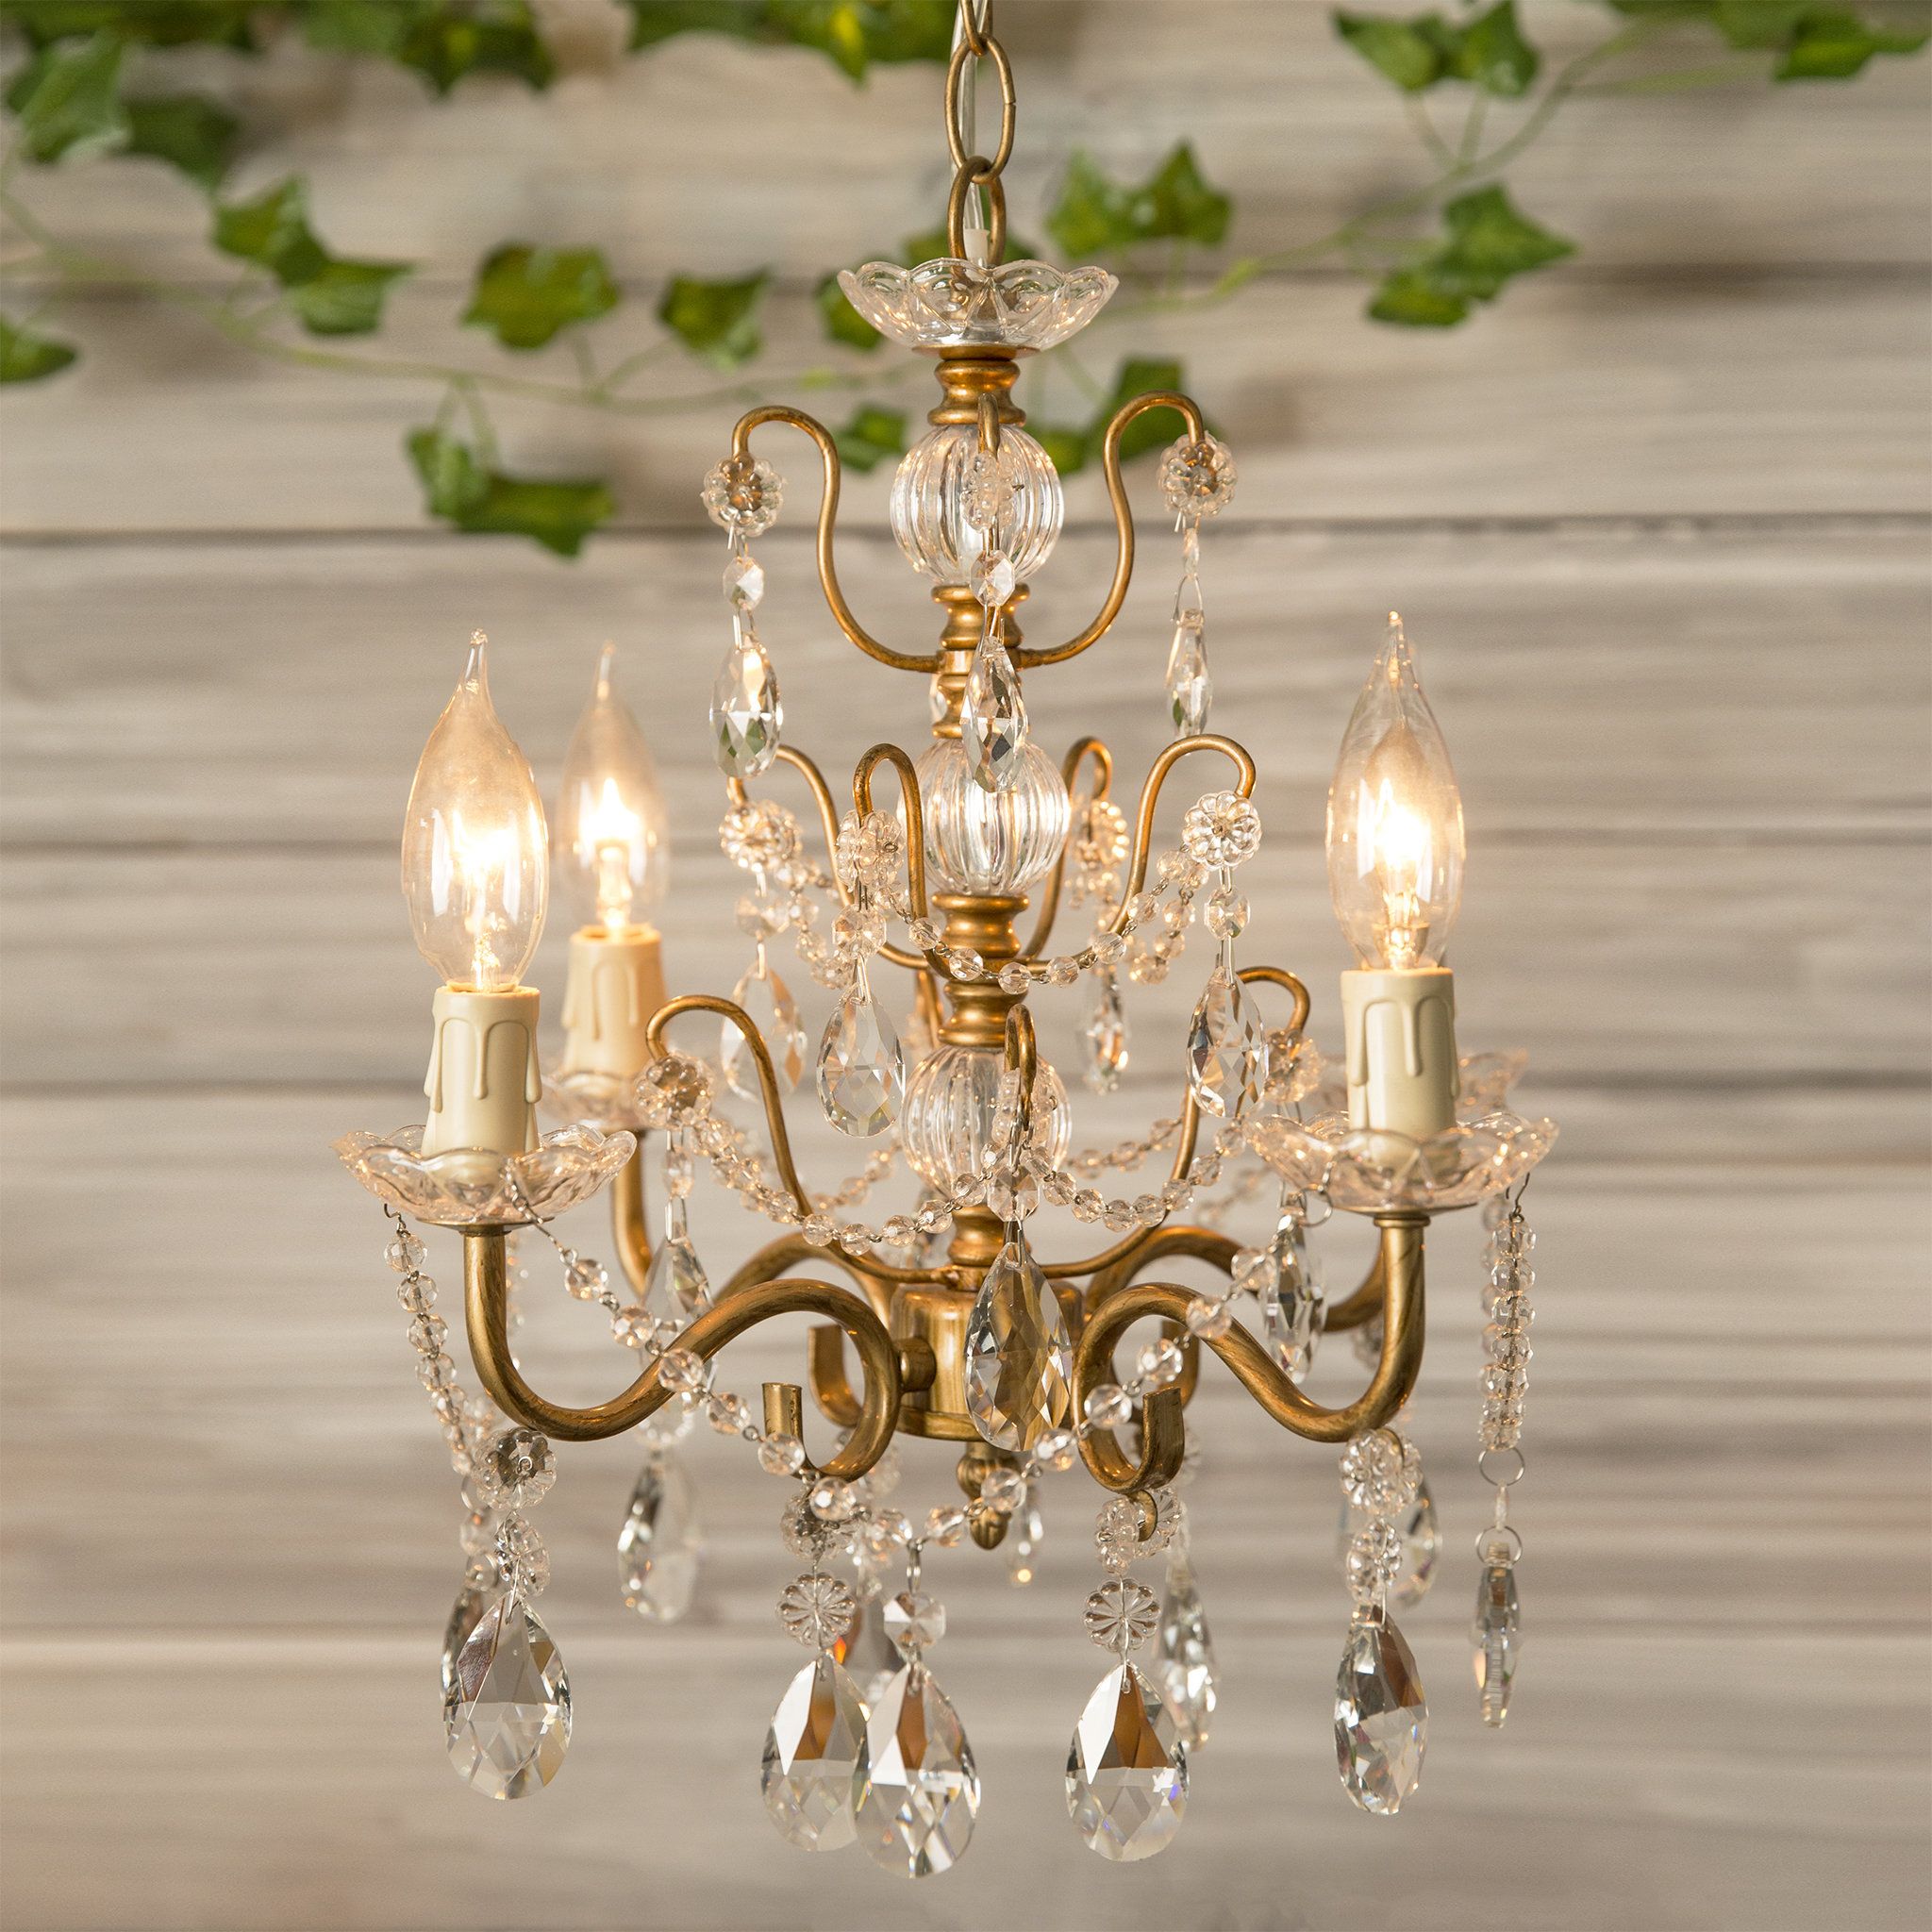 Blanchette 4 Light Candle Style Chandelier With Regard To Blanchette 5 Light Candle Style Chandeliers (View 3 of 30)